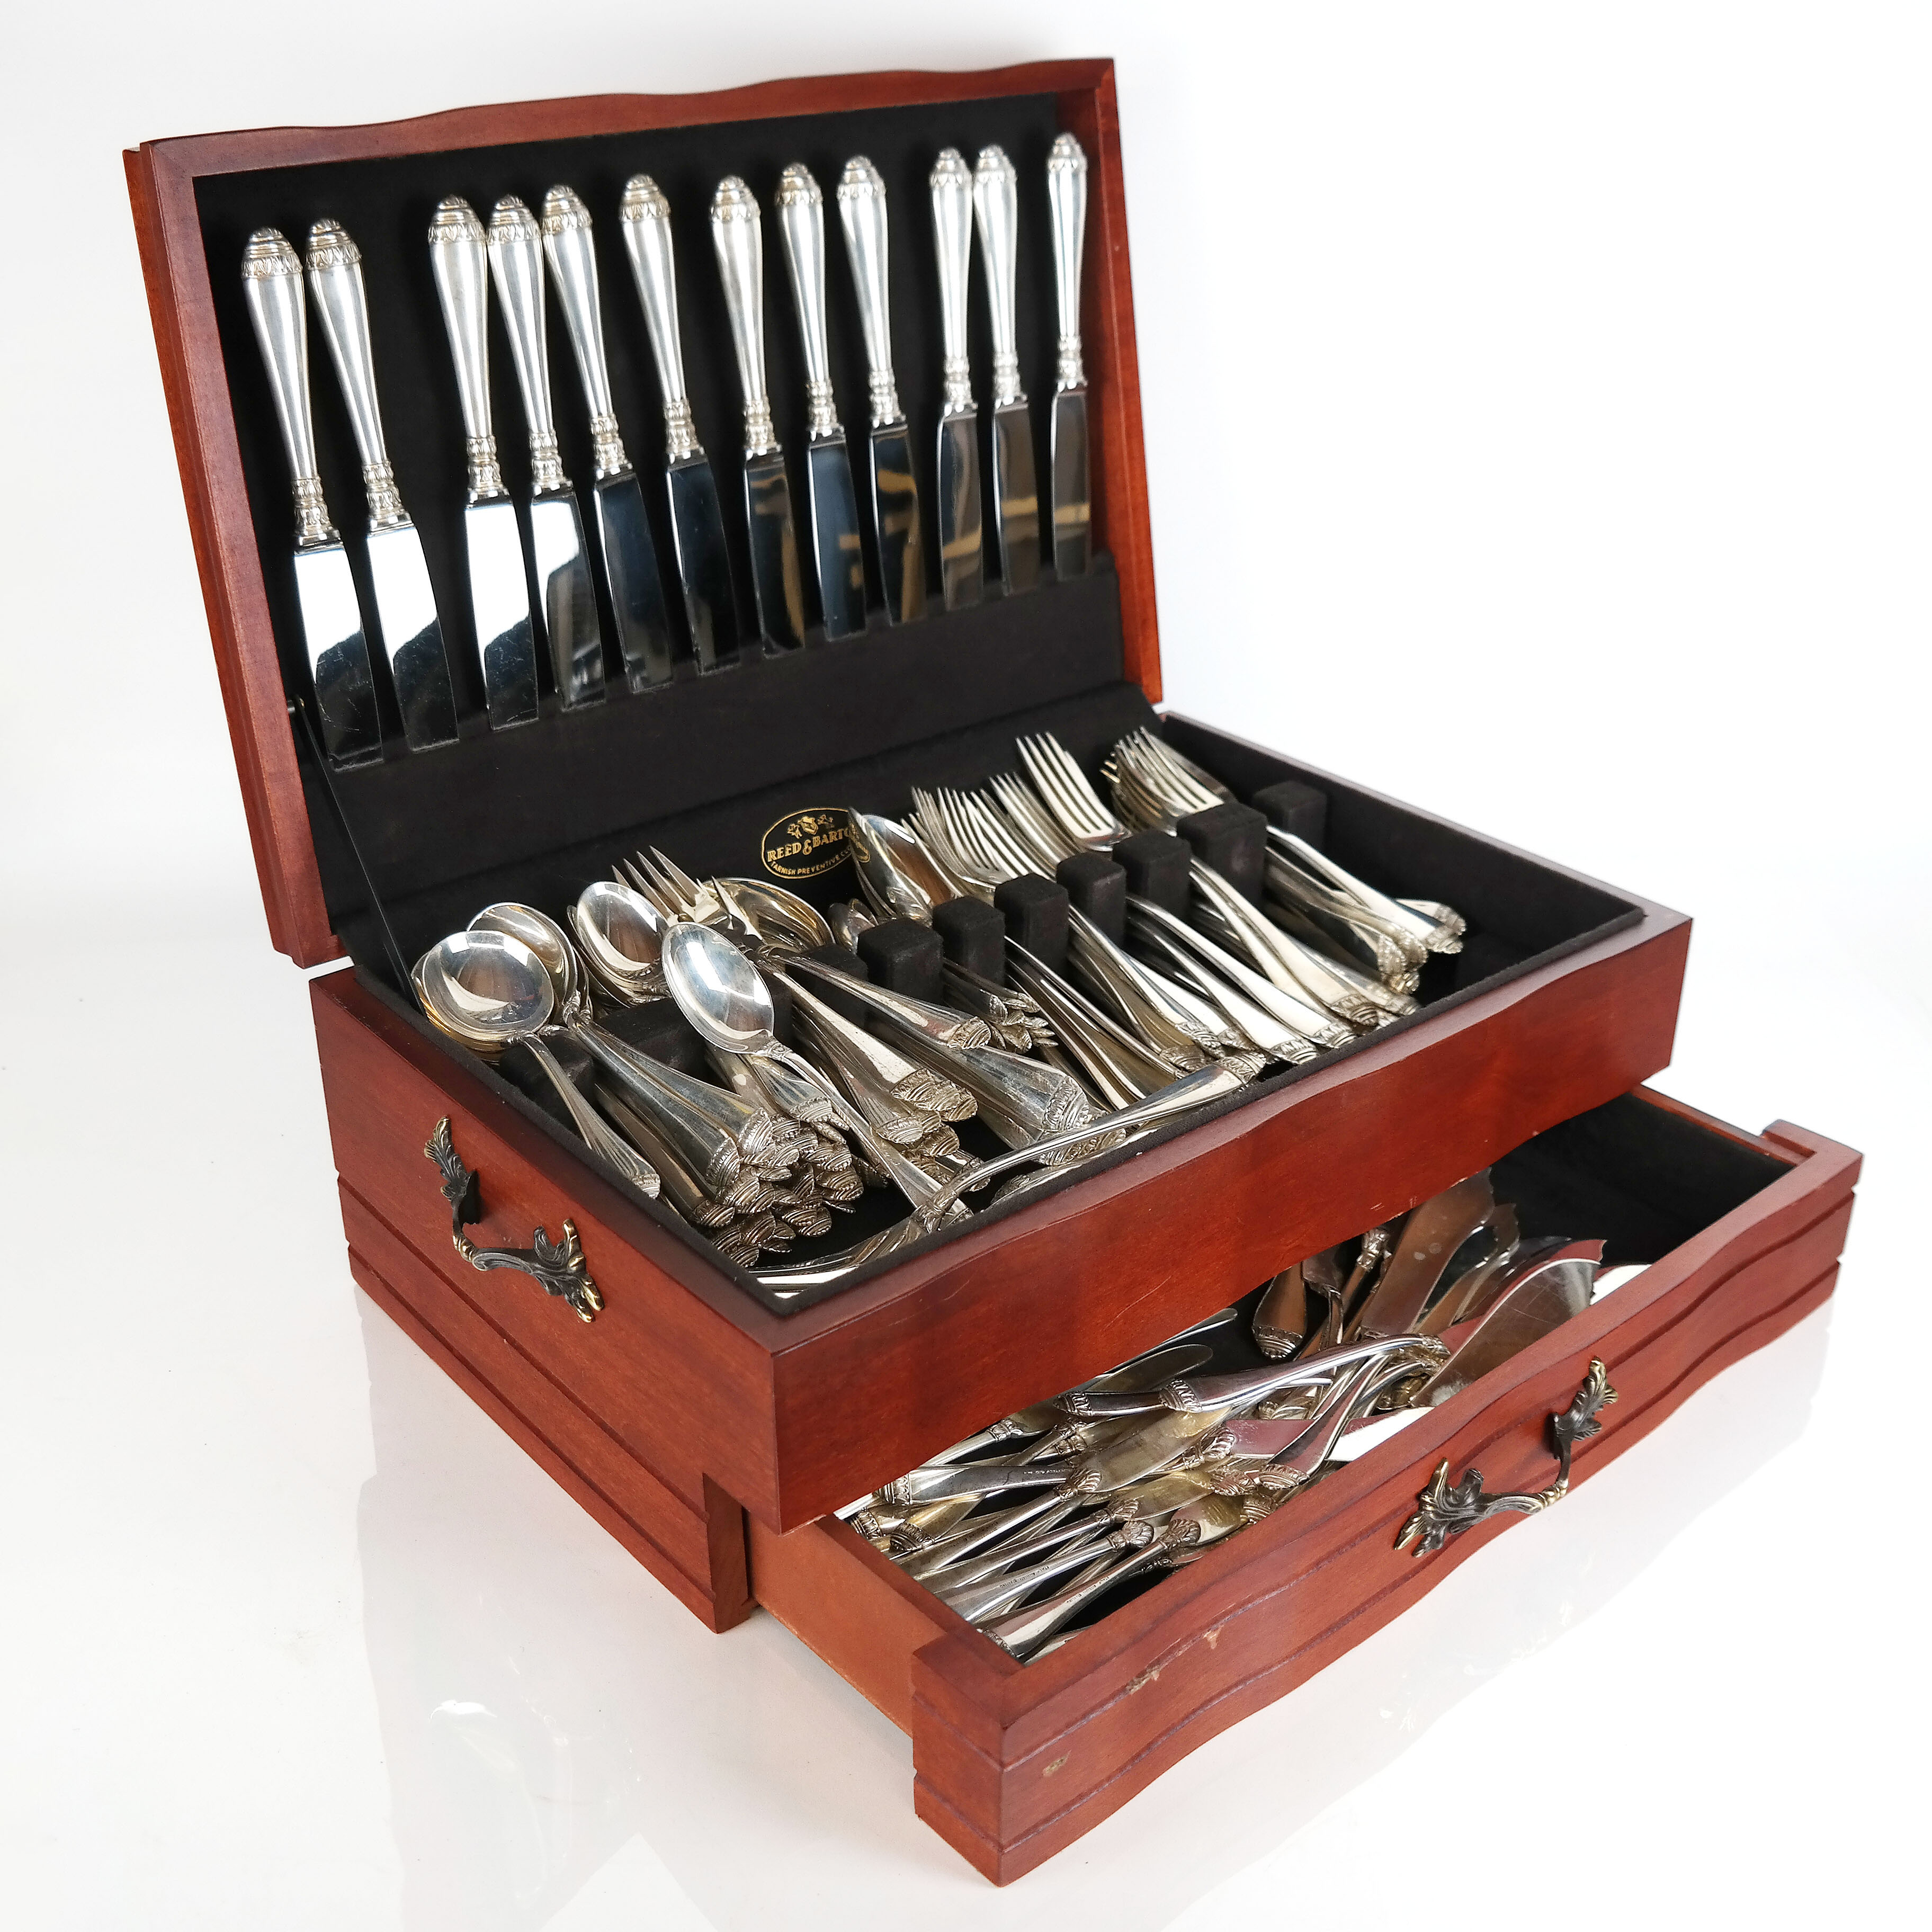 150-piece set of Buccellati silver flatware and serving pieces in the French Empire pattern, est. $6,000-$8,000